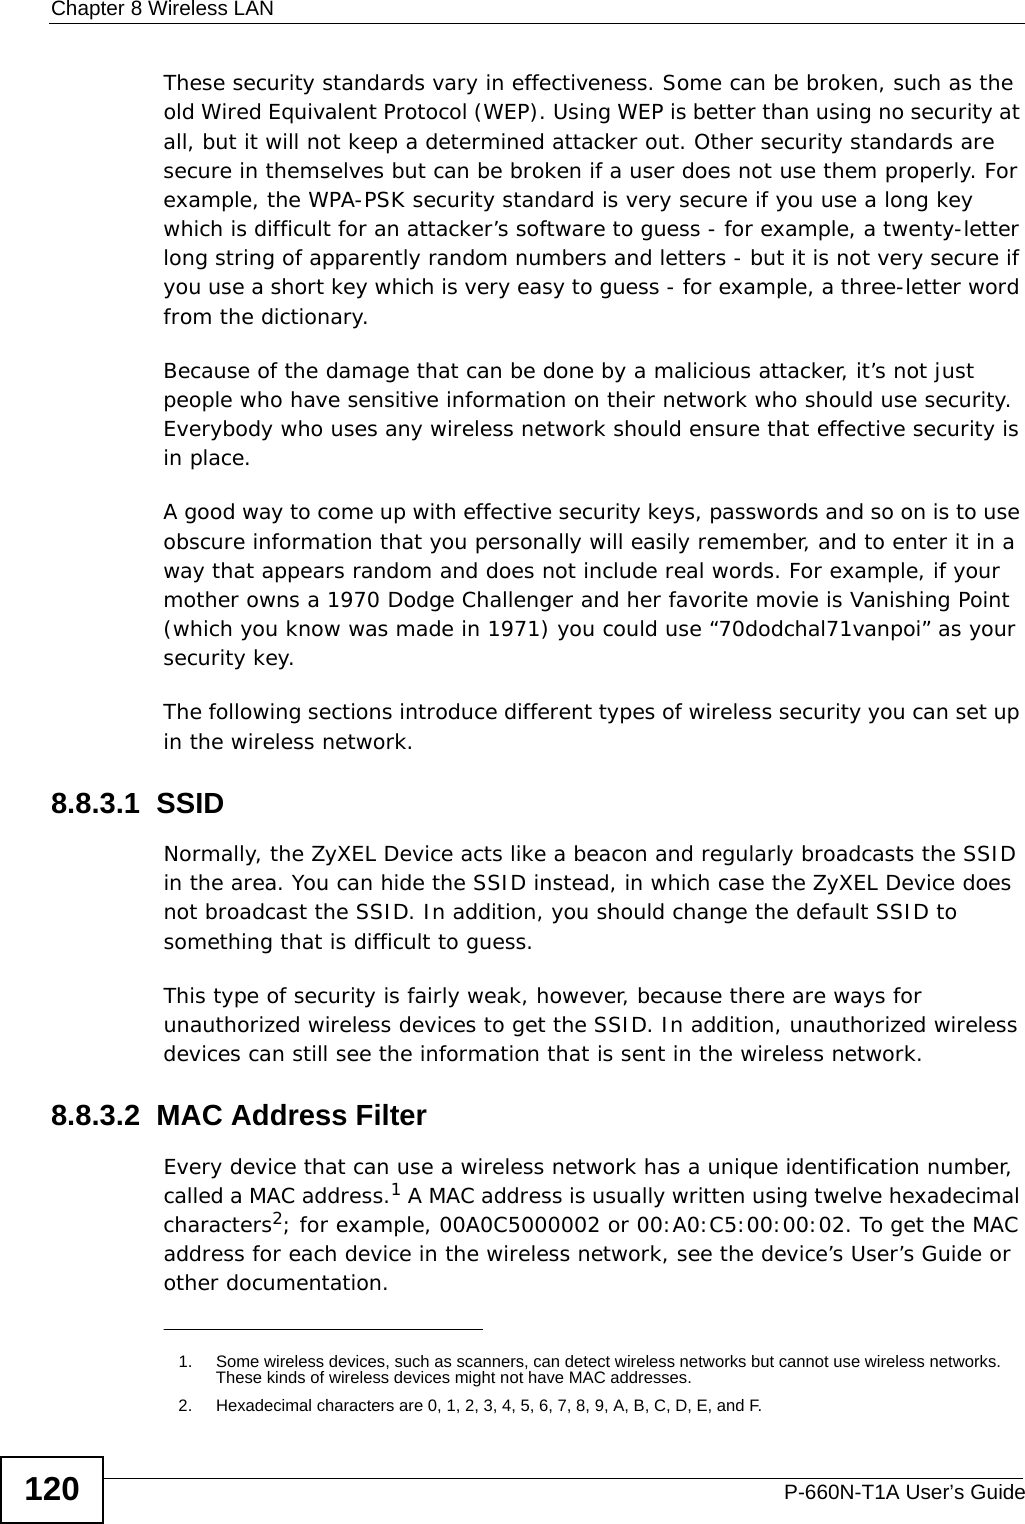 Chapter 8 Wireless LANP-660N-T1A User’s Guide120These security standards vary in effectiveness. Some can be broken, such as the old Wired Equivalent Protocol (WEP). Using WEP is better than using no security at all, but it will not keep a determined attacker out. Other security standards are secure in themselves but can be broken if a user does not use them properly. For example, the WPA-PSK security standard is very secure if you use a long key which is difficult for an attacker’s software to guess - for example, a twenty-letter long string of apparently random numbers and letters - but it is not very secure if you use a short key which is very easy to guess - for example, a three-letter word from the dictionary.Because of the damage that can be done by a malicious attacker, it’s not just people who have sensitive information on their network who should use security. Everybody who uses any wireless network should ensure that effective security is in place.A good way to come up with effective security keys, passwords and so on is to use obscure information that you personally will easily remember, and to enter it in a way that appears random and does not include real words. For example, if your mother owns a 1970 Dodge Challenger and her favorite movie is Vanishing Point (which you know was made in 1971) you could use “70dodchal71vanpoi” as your security key.The following sections introduce different types of wireless security you can set up in the wireless network.8.8.3.1  SSIDNormally, the ZyXEL Device acts like a beacon and regularly broadcasts the SSID in the area. You can hide the SSID instead, in which case the ZyXEL Device does not broadcast the SSID. In addition, you should change the default SSID to something that is difficult to guess.This type of security is fairly weak, however, because there are ways for unauthorized wireless devices to get the SSID. In addition, unauthorized wireless devices can still see the information that is sent in the wireless network.8.8.3.2  MAC Address FilterEvery device that can use a wireless network has a unique identification number, called a MAC address.1 A MAC address is usually written using twelve hexadecimal characters2; for example, 00A0C5000002 or 00:A0:C5:00:00:02. To get the MAC address for each device in the wireless network, see the device’s User’s Guide or other documentation.1. Some wireless devices, such as scanners, can detect wireless networks but cannot use wireless networks. These kinds of wireless devices might not have MAC addresses.2. Hexadecimal characters are 0, 1, 2, 3, 4, 5, 6, 7, 8, 9, A, B, C, D, E, and F.